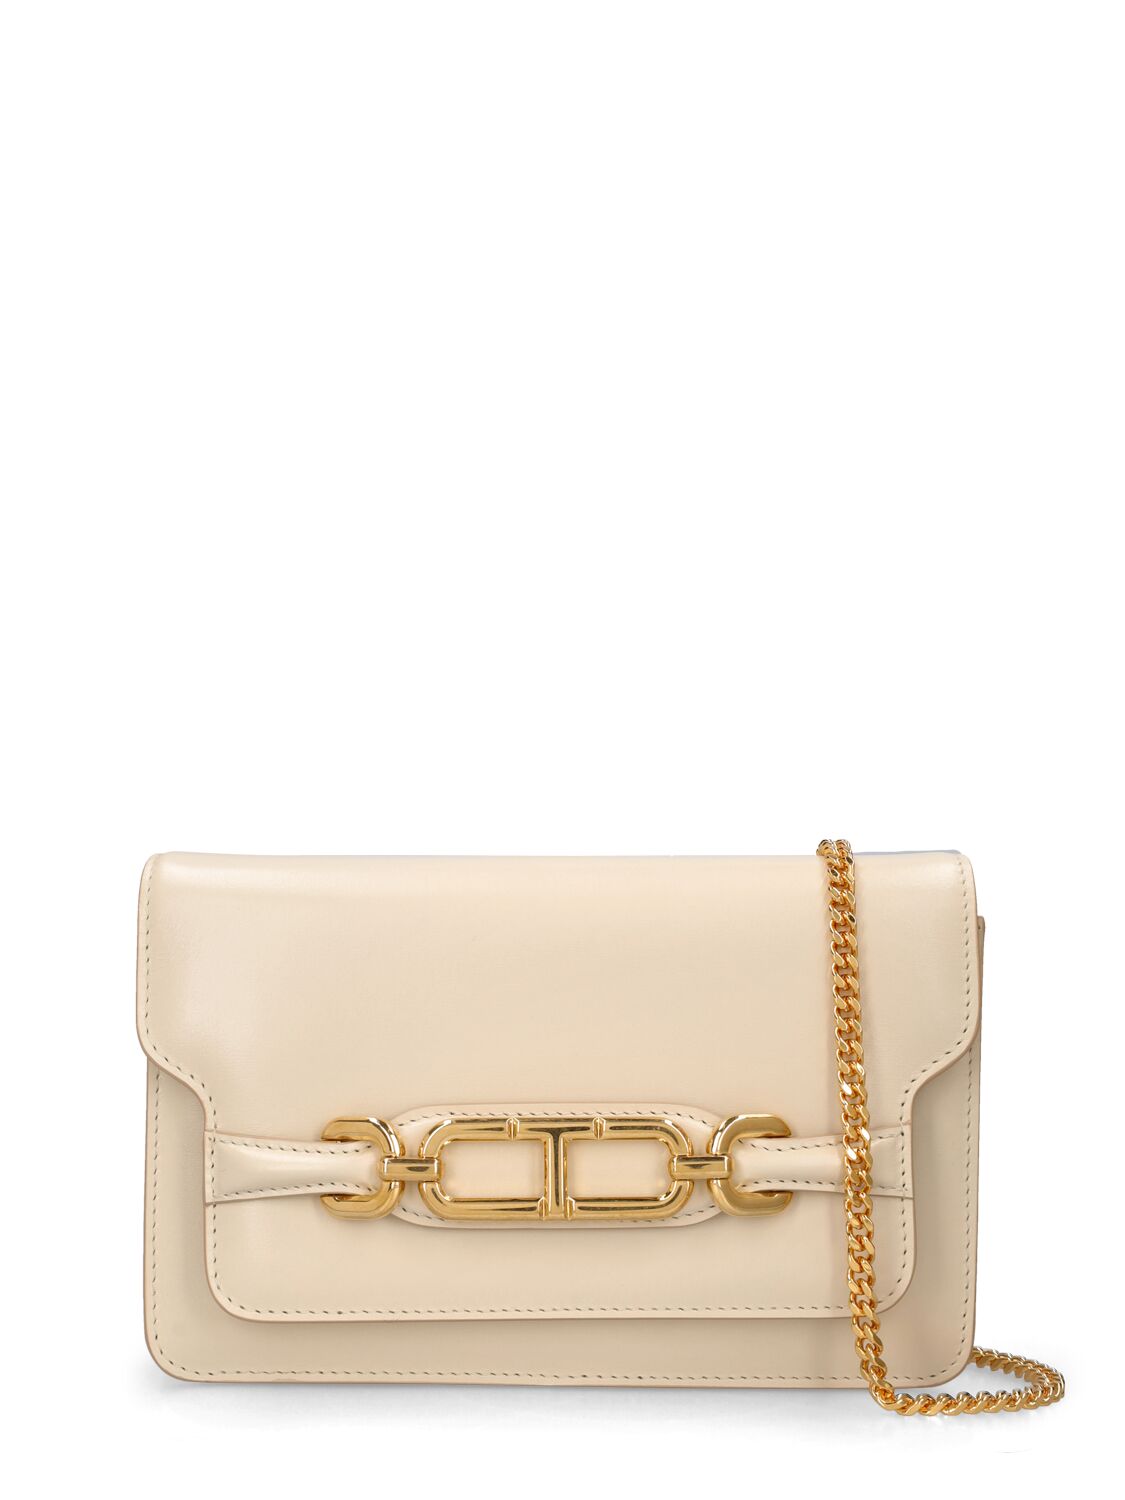 Tom Ford Small Box Leather Shoulder Bag In Cream